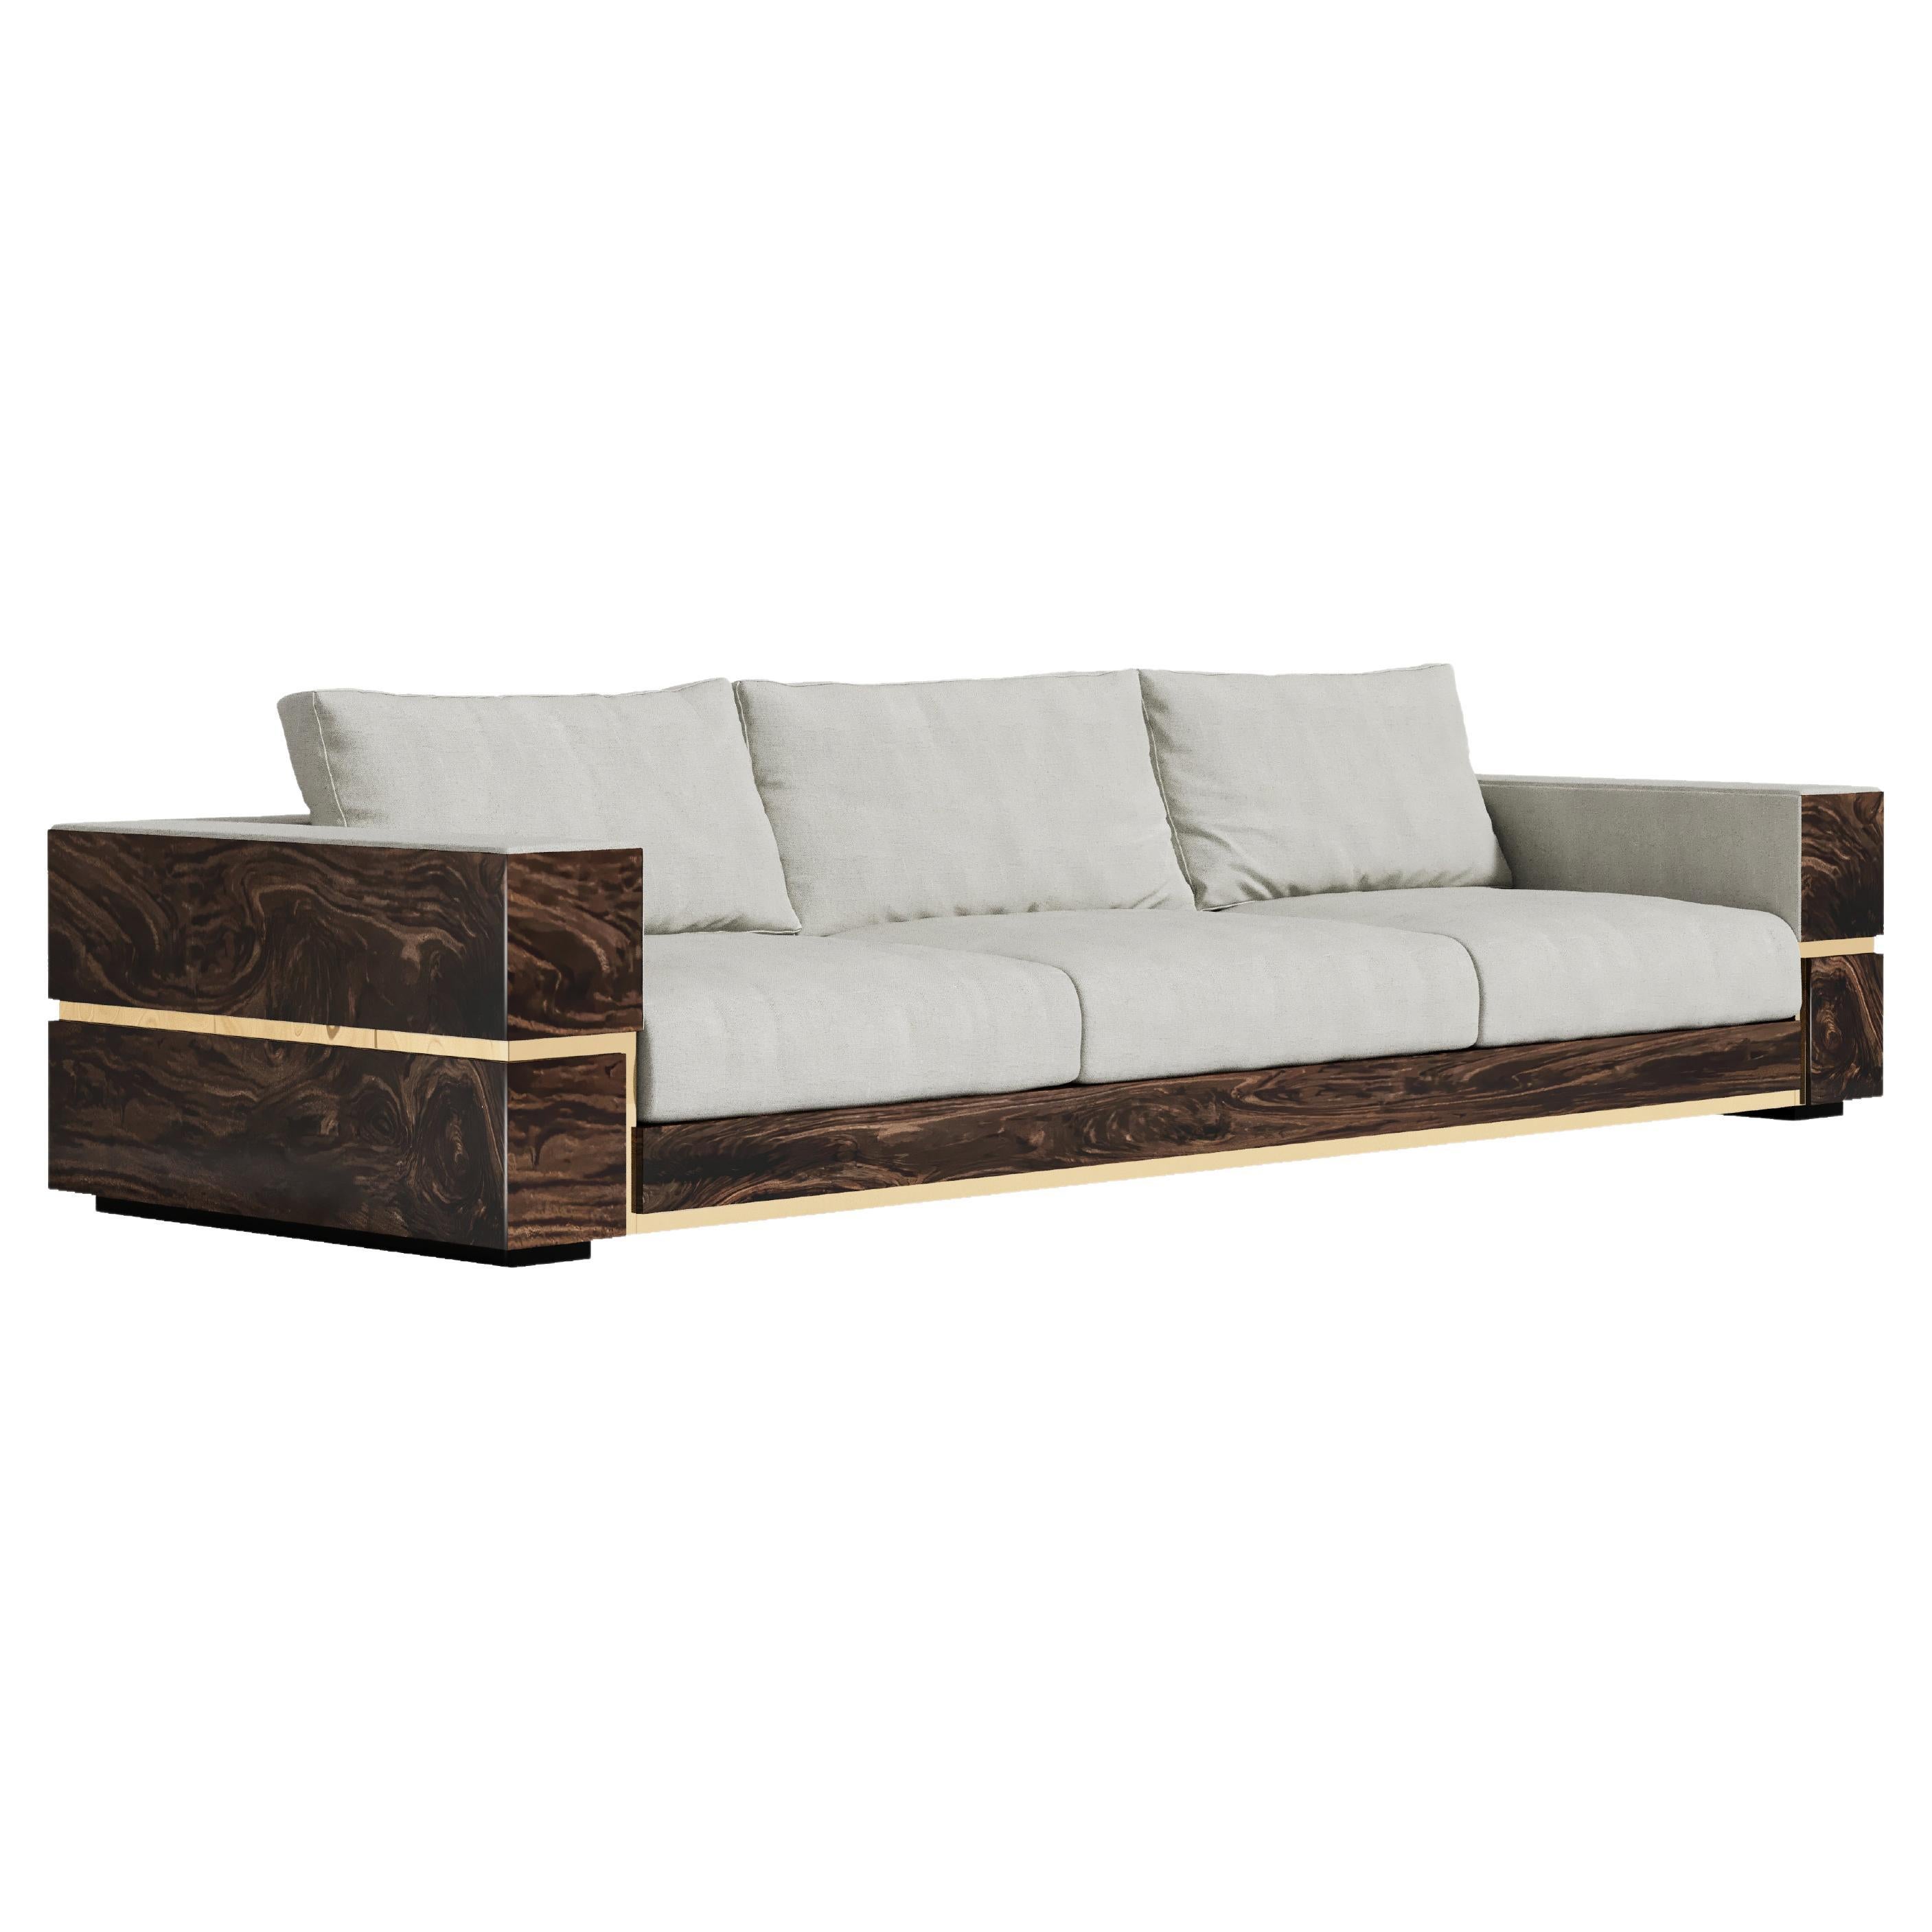 Balteus Sofa in Polished Bronze and Fabric Upholstery By Palena Furniture